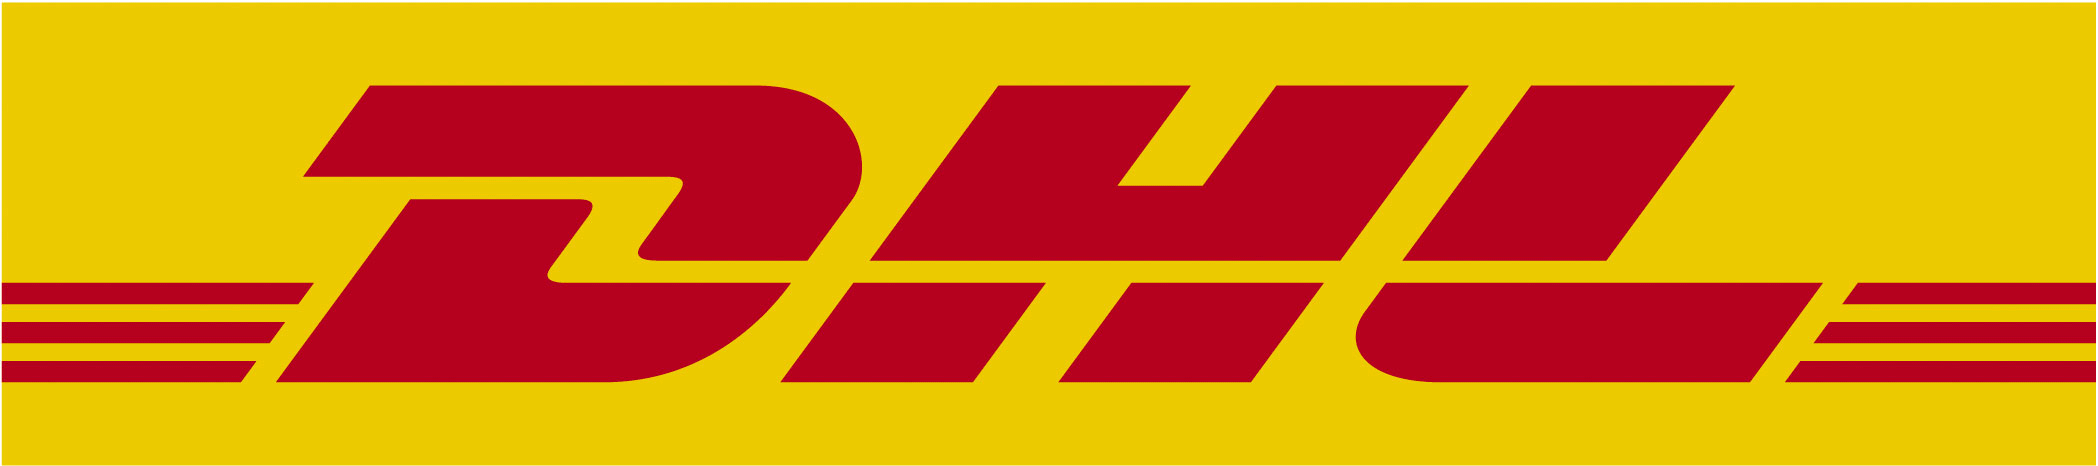 DHL Struggling to Make Profit in U.S., Journal Reports | Transport Topics